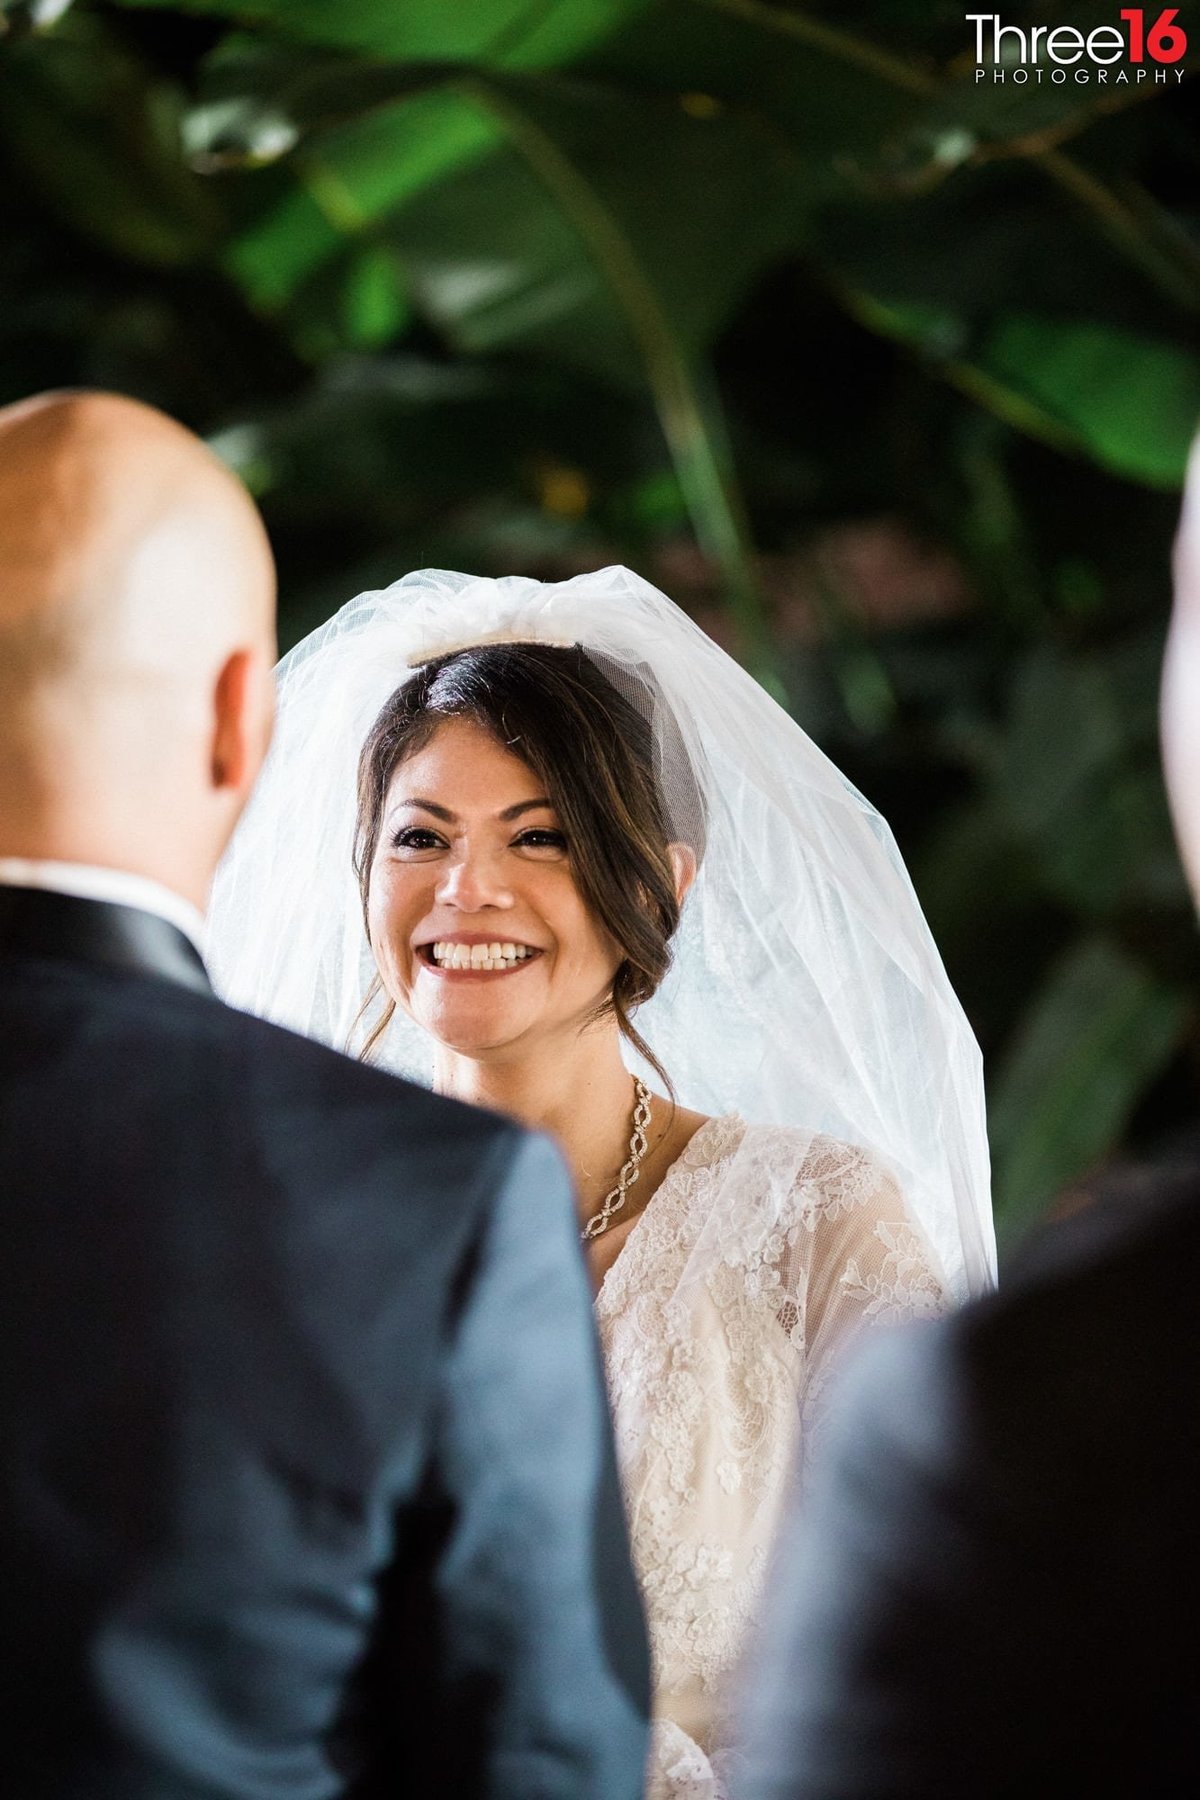 Bride smiles big at her Groom at the altar